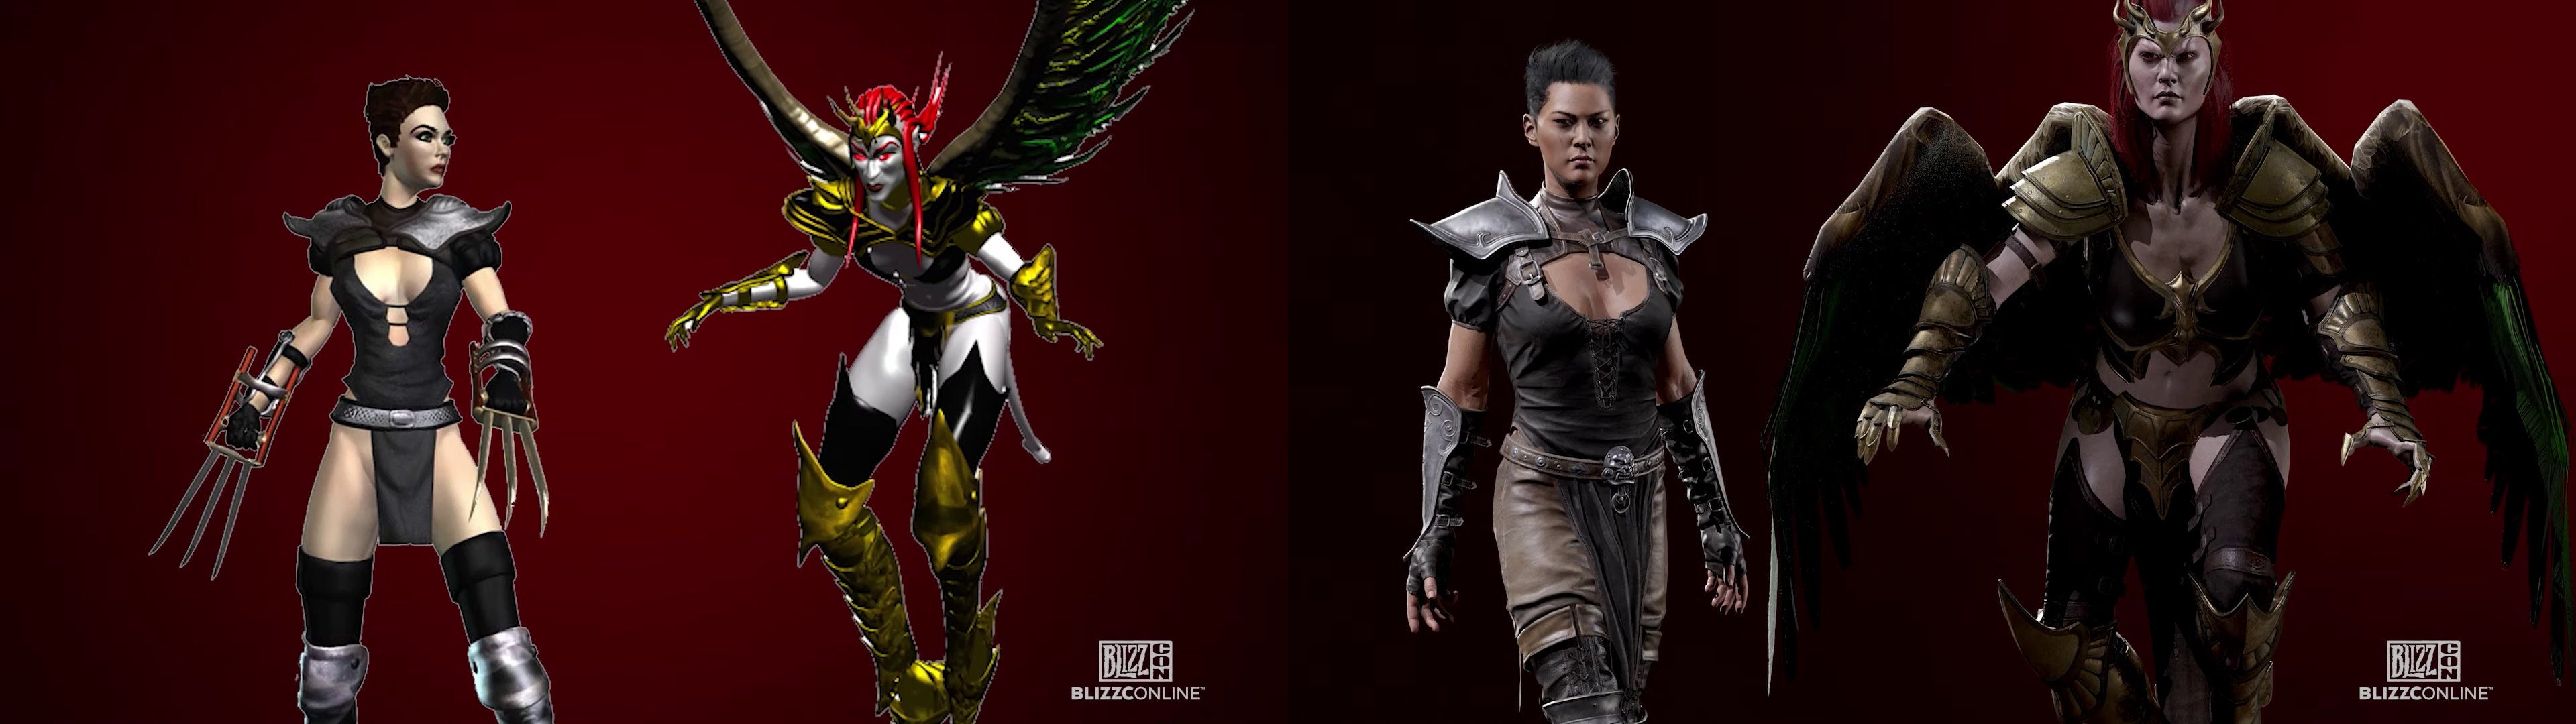 Diablo 2's original and remastered Assassin and Succubus, who both shared a 3D model for their body 3D.